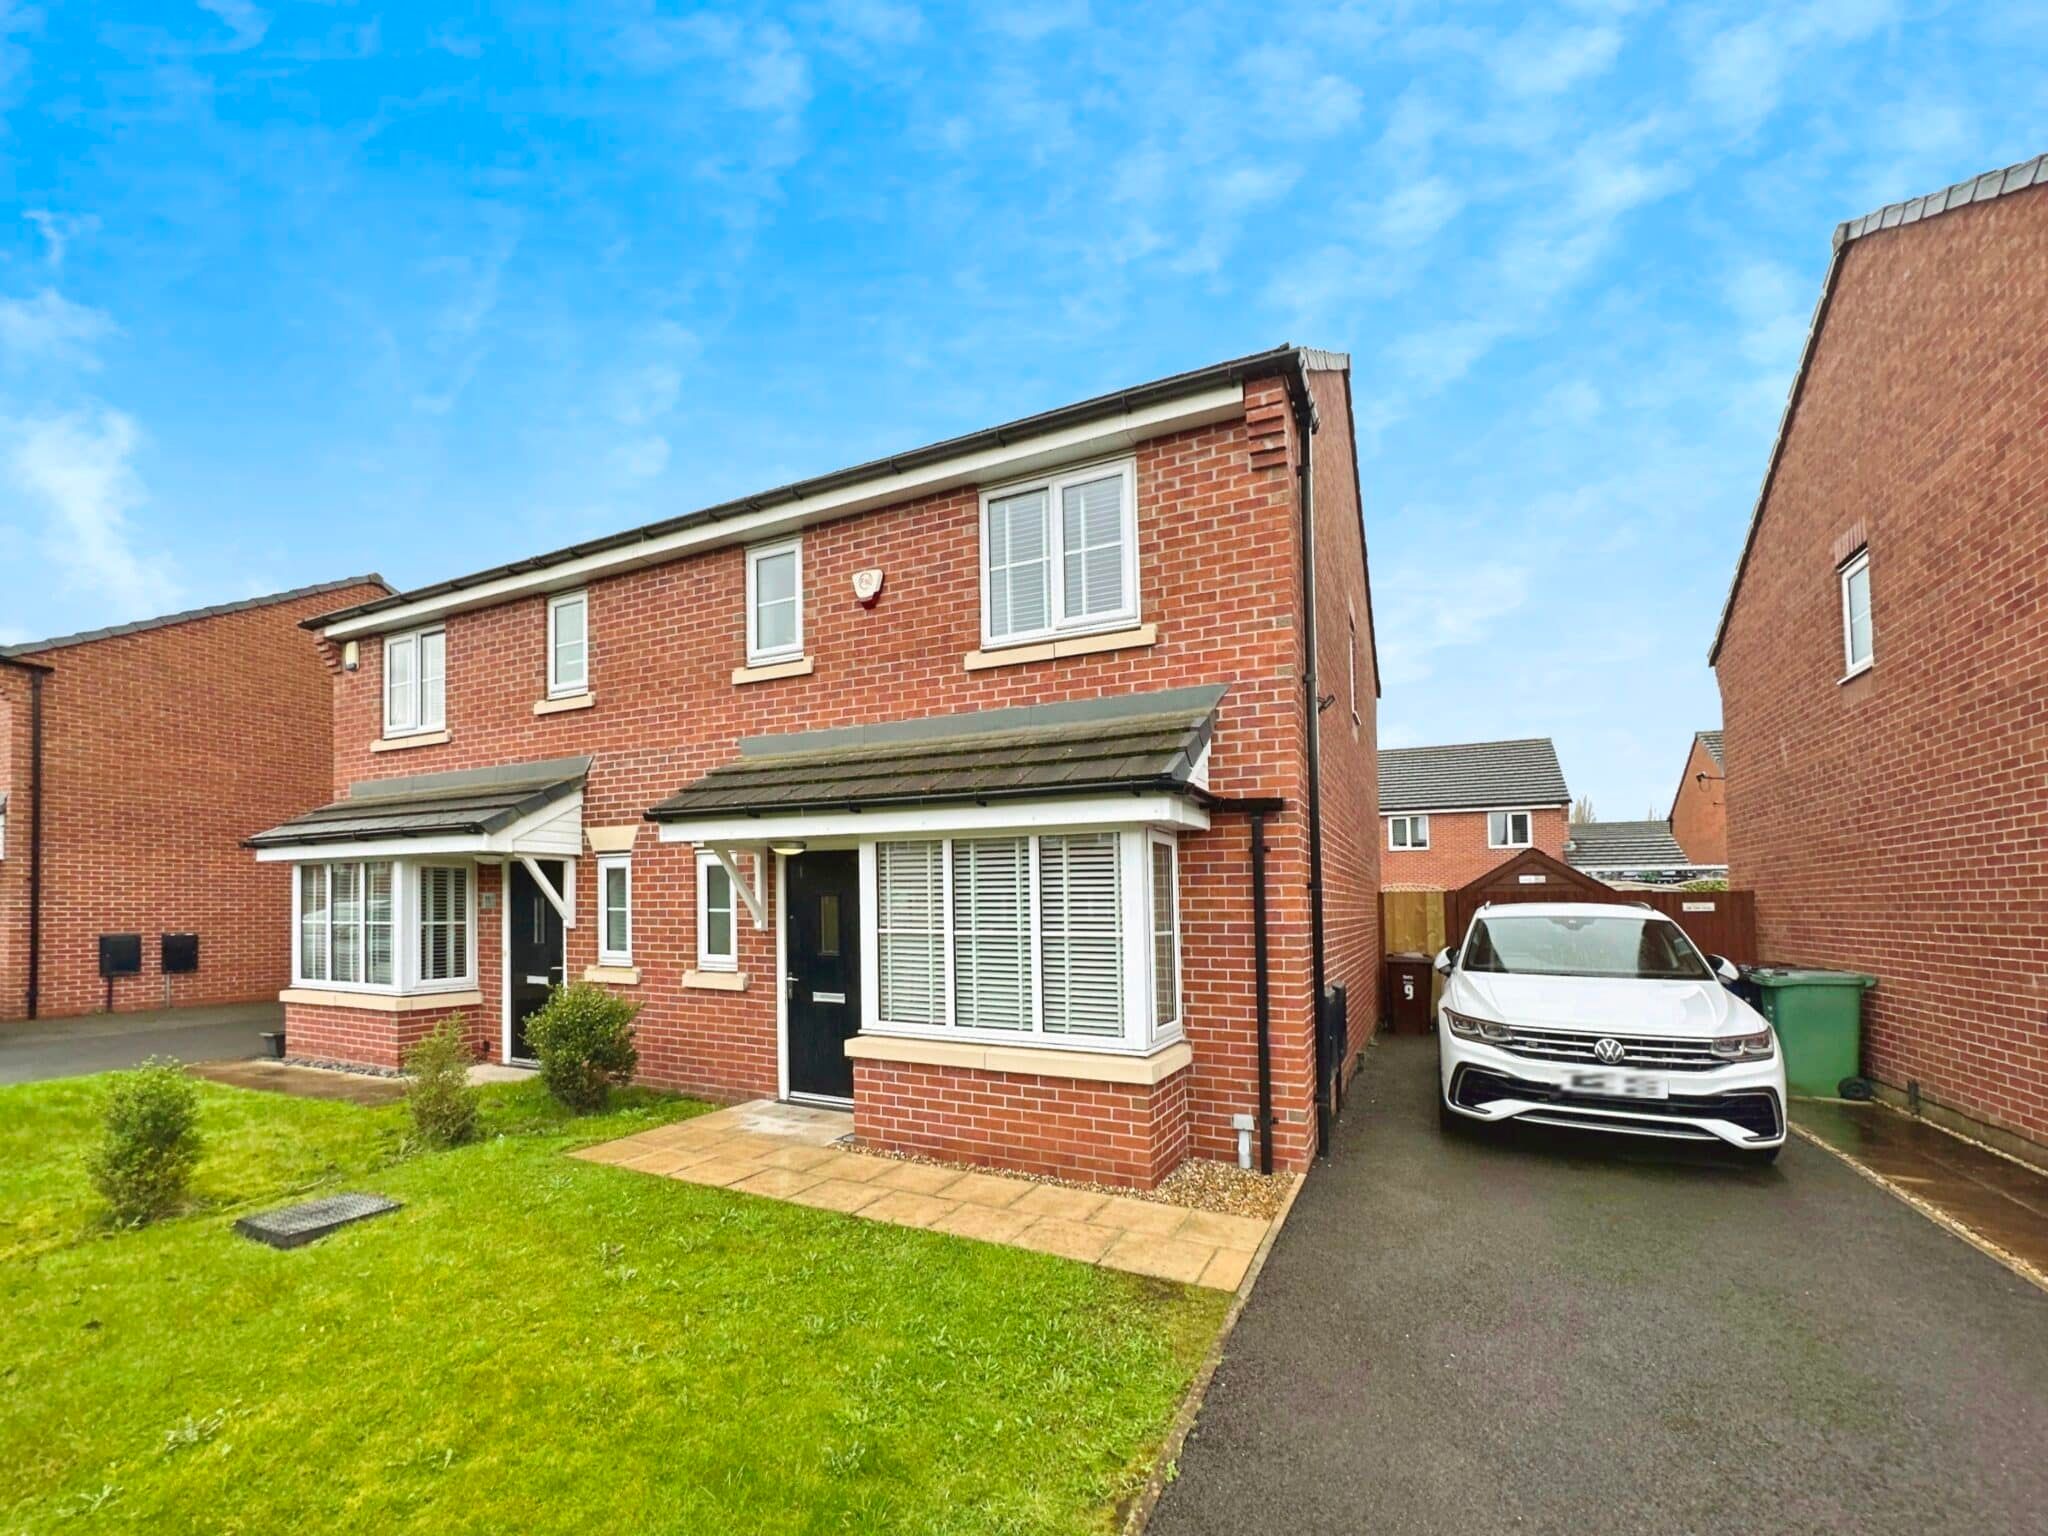 Hardys Drive, Radcliffe, Manchester, Manchester, M26 2TL